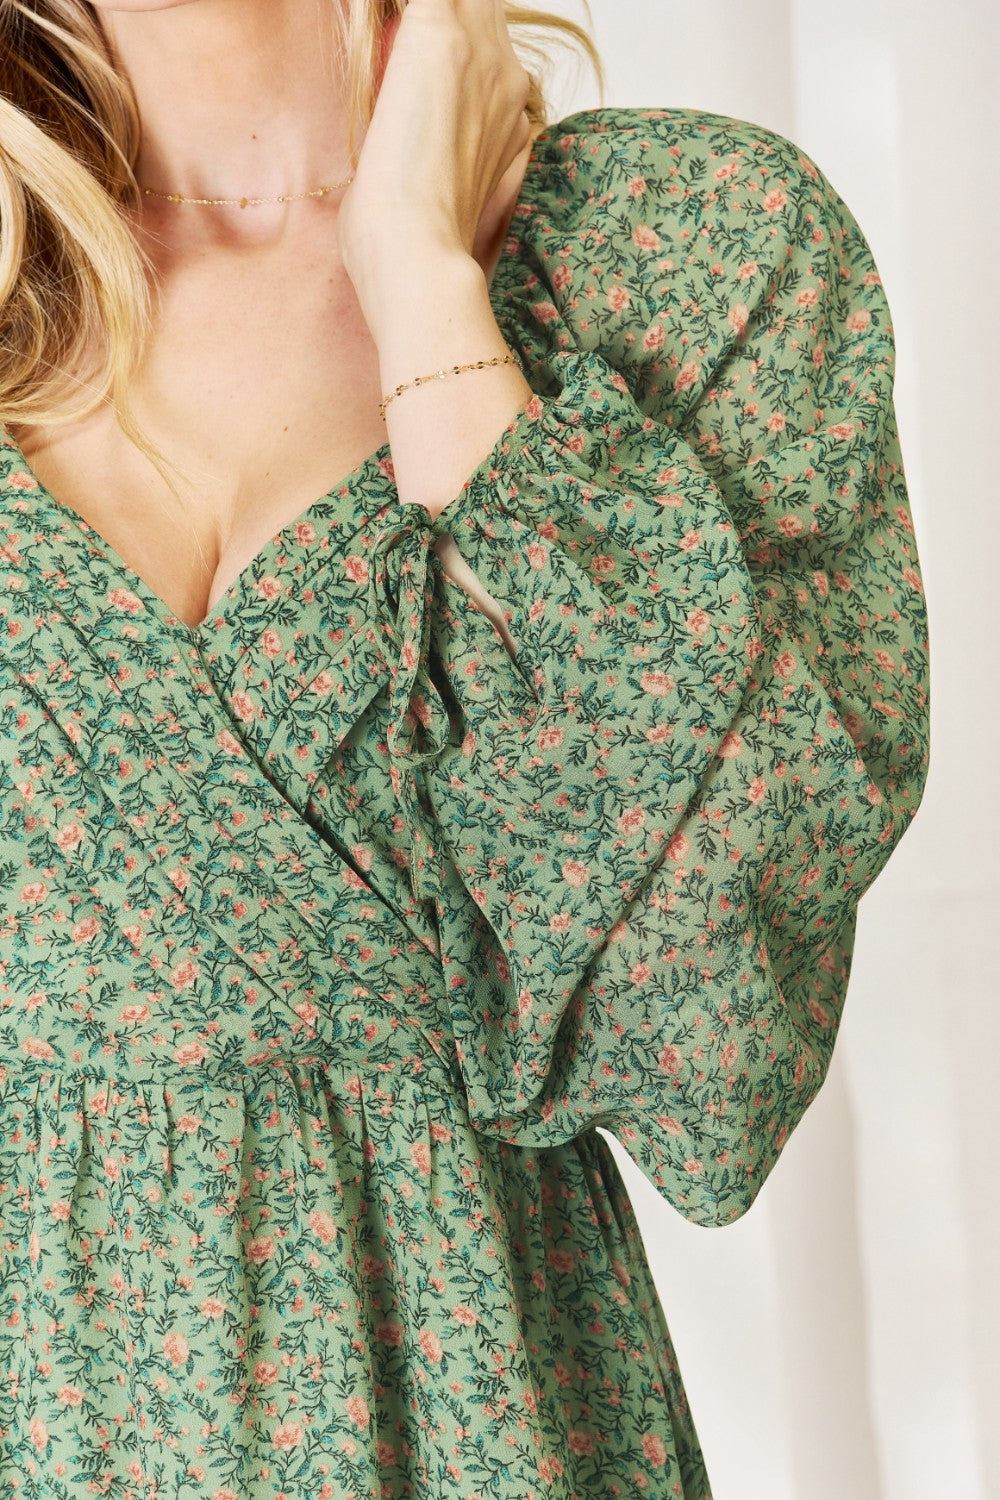 Floral Peplum Blouse - Green - Inspired Eye Boutique